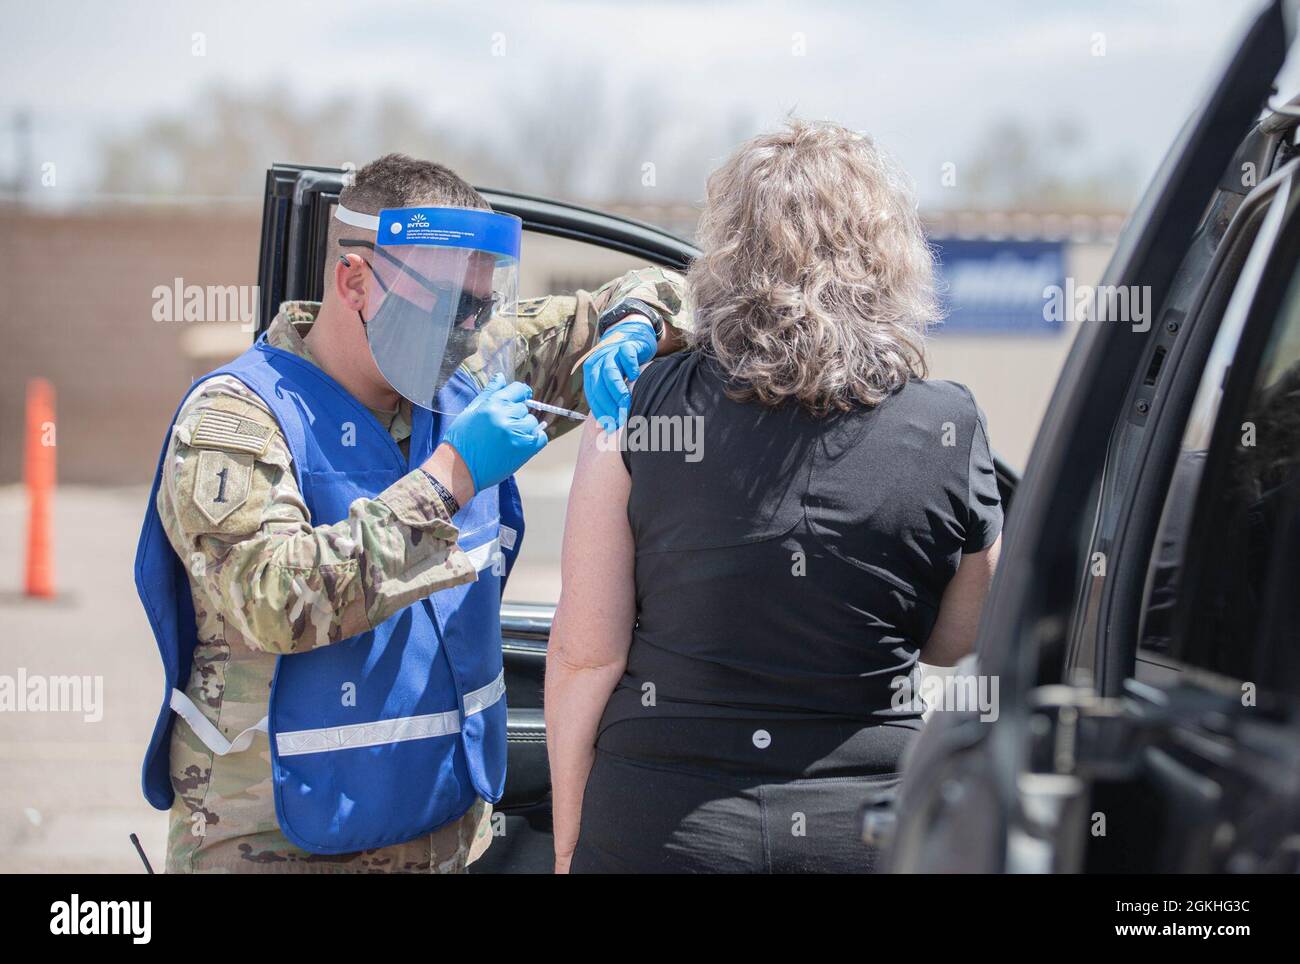 U.S. Army Sgt. Alec Derr, a combat medic assigned to 2nd Stryker Brigade Combat Team, 4th Infantry Division, administers a vaccination to a community member in Pueblo, Colorado, April 23, 2021. The Soldiers deployed from Fort Carson, Colorado, to provide support at the Pueblo Community Vaccination Center. U.S. Northern Command, through U.S. Army North, remains committed to providing continued, flexible Department of Defense support to the Federal Emergency Management Agency as part of the whole-of-government response to COVID-19. Stock Photo